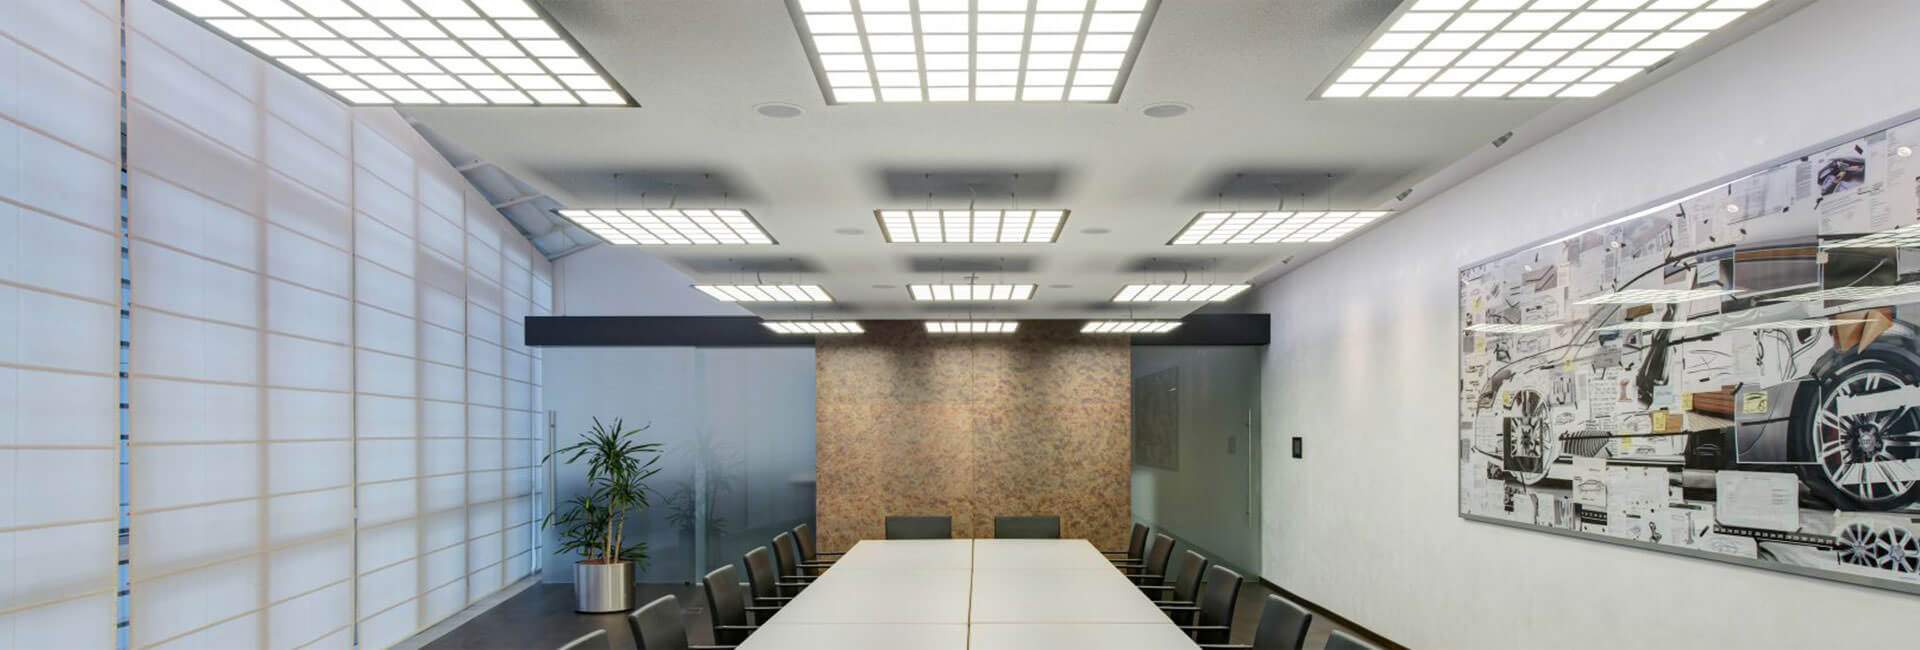 OLED luminaires in conference room at Audi Forum